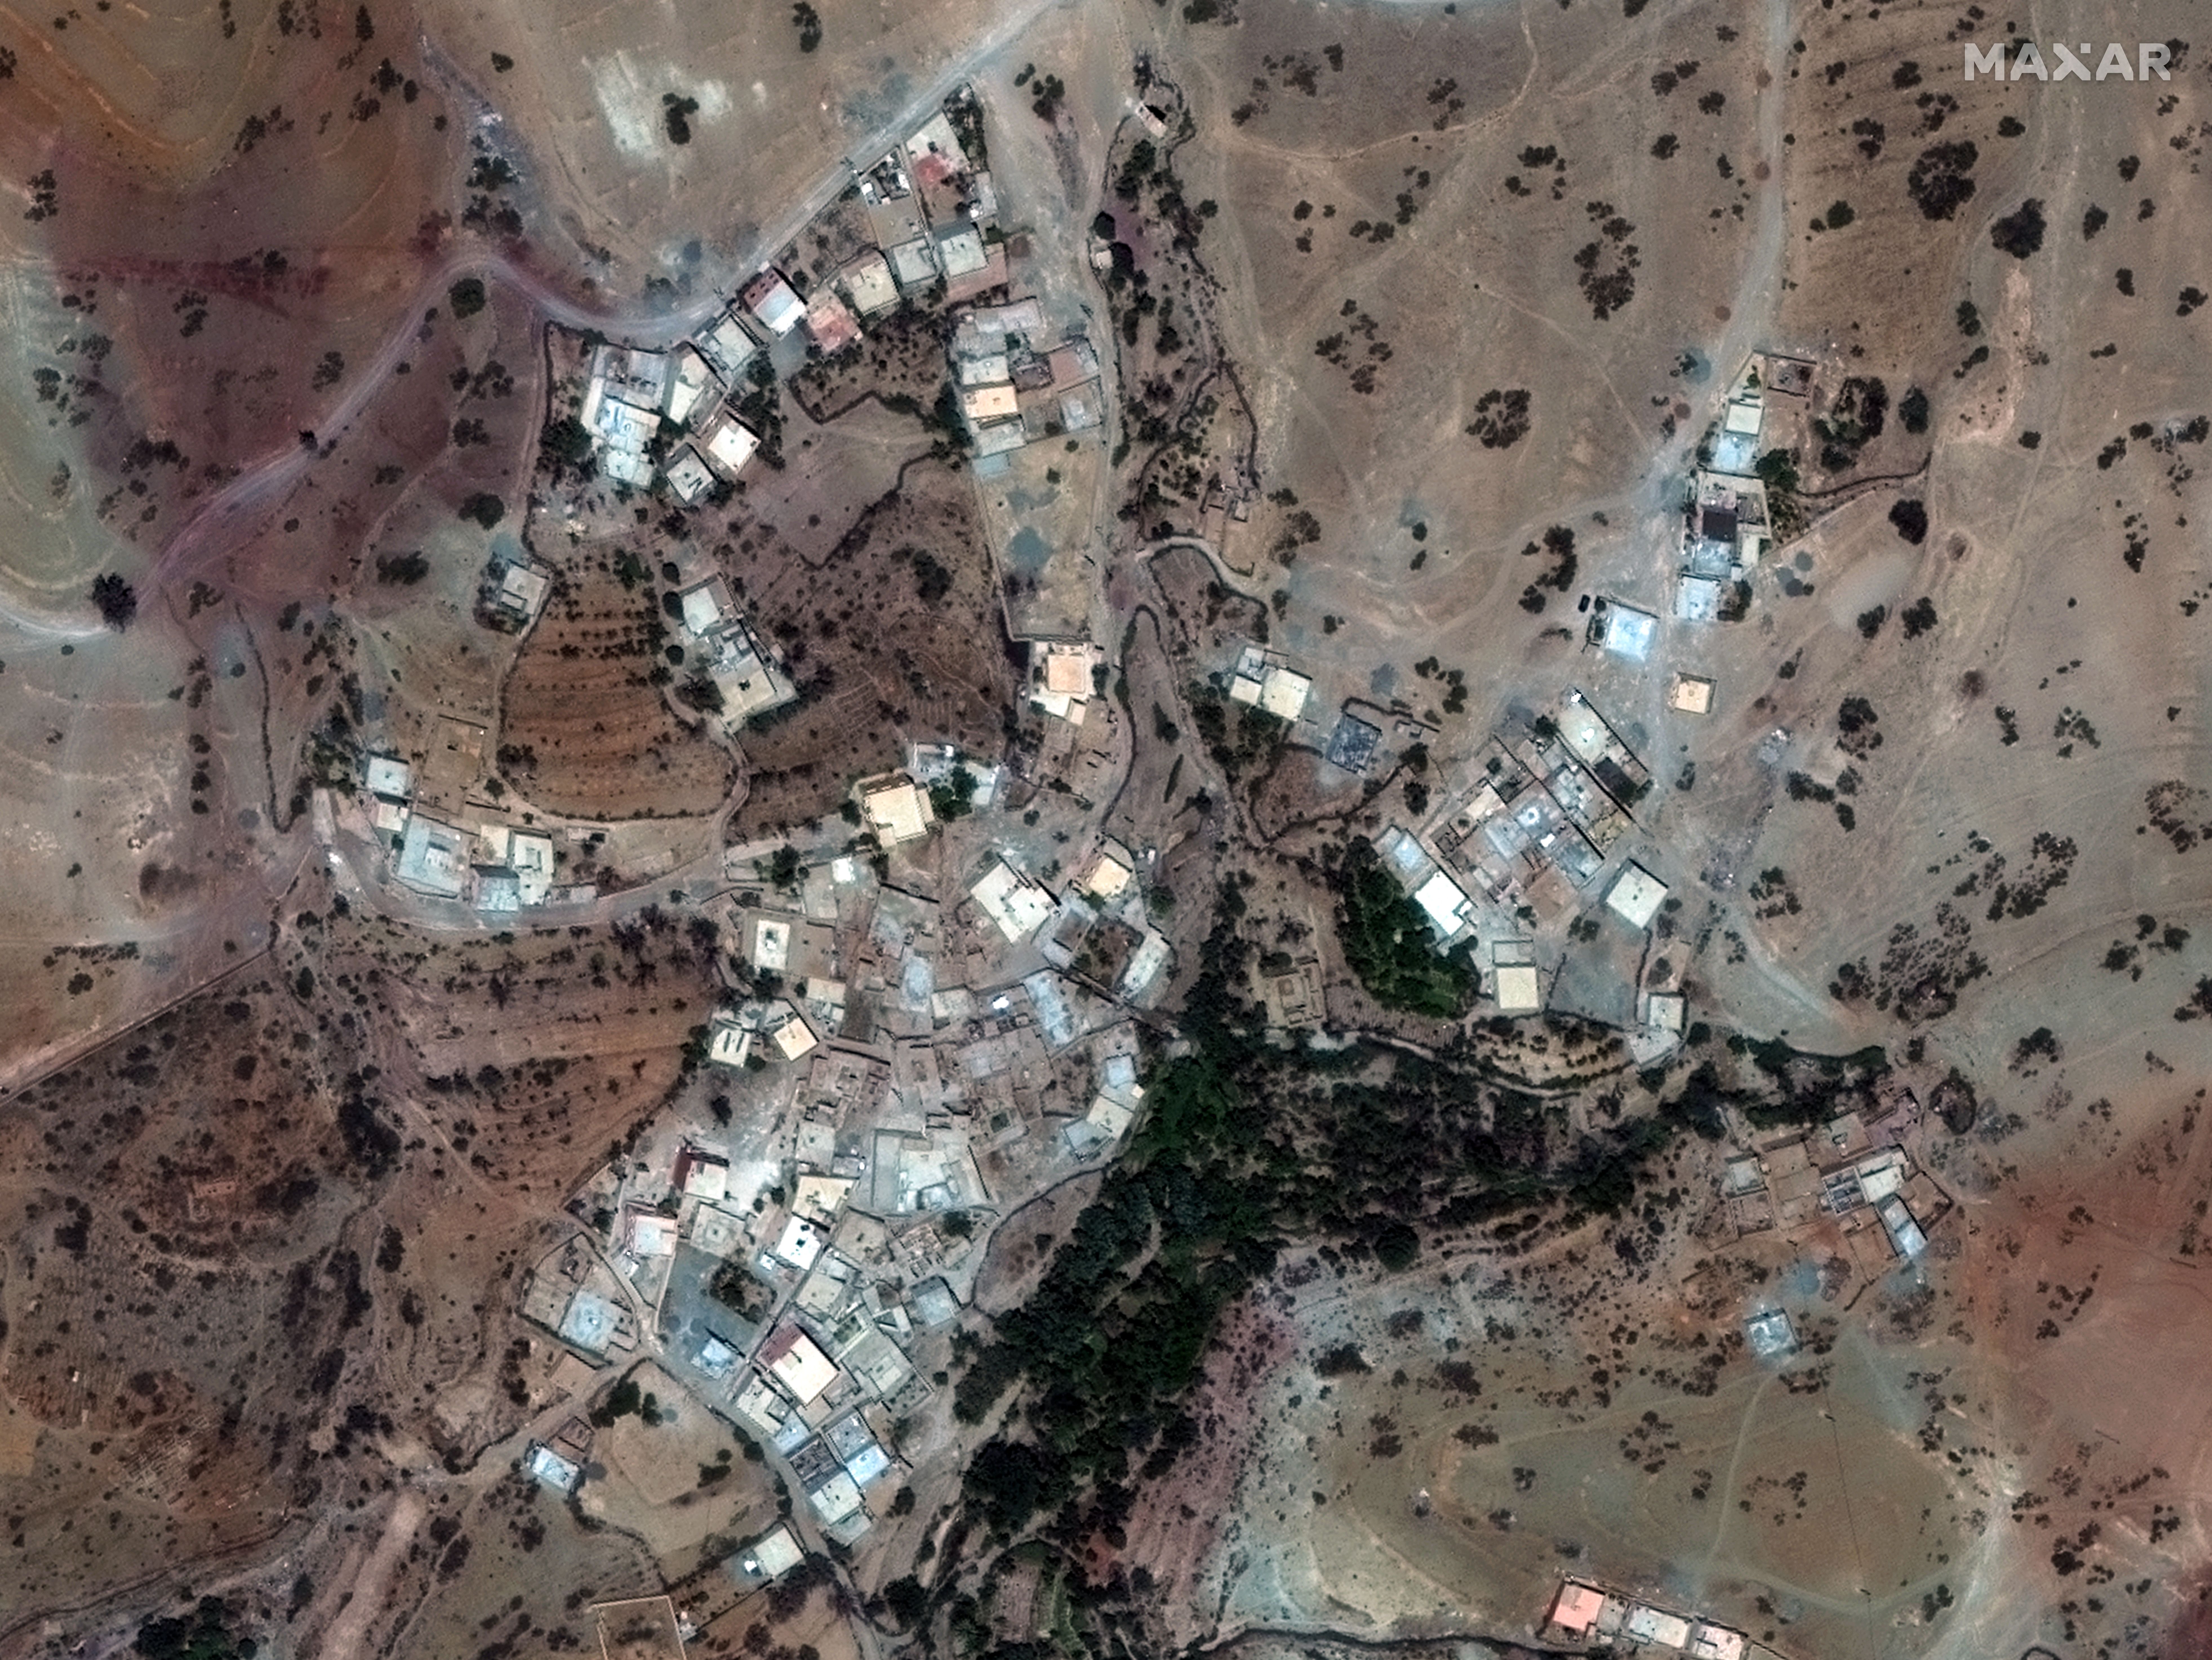 Satellite image shows the Moroccan town of Talat N’yaaqoub before Friday's earthquake. 